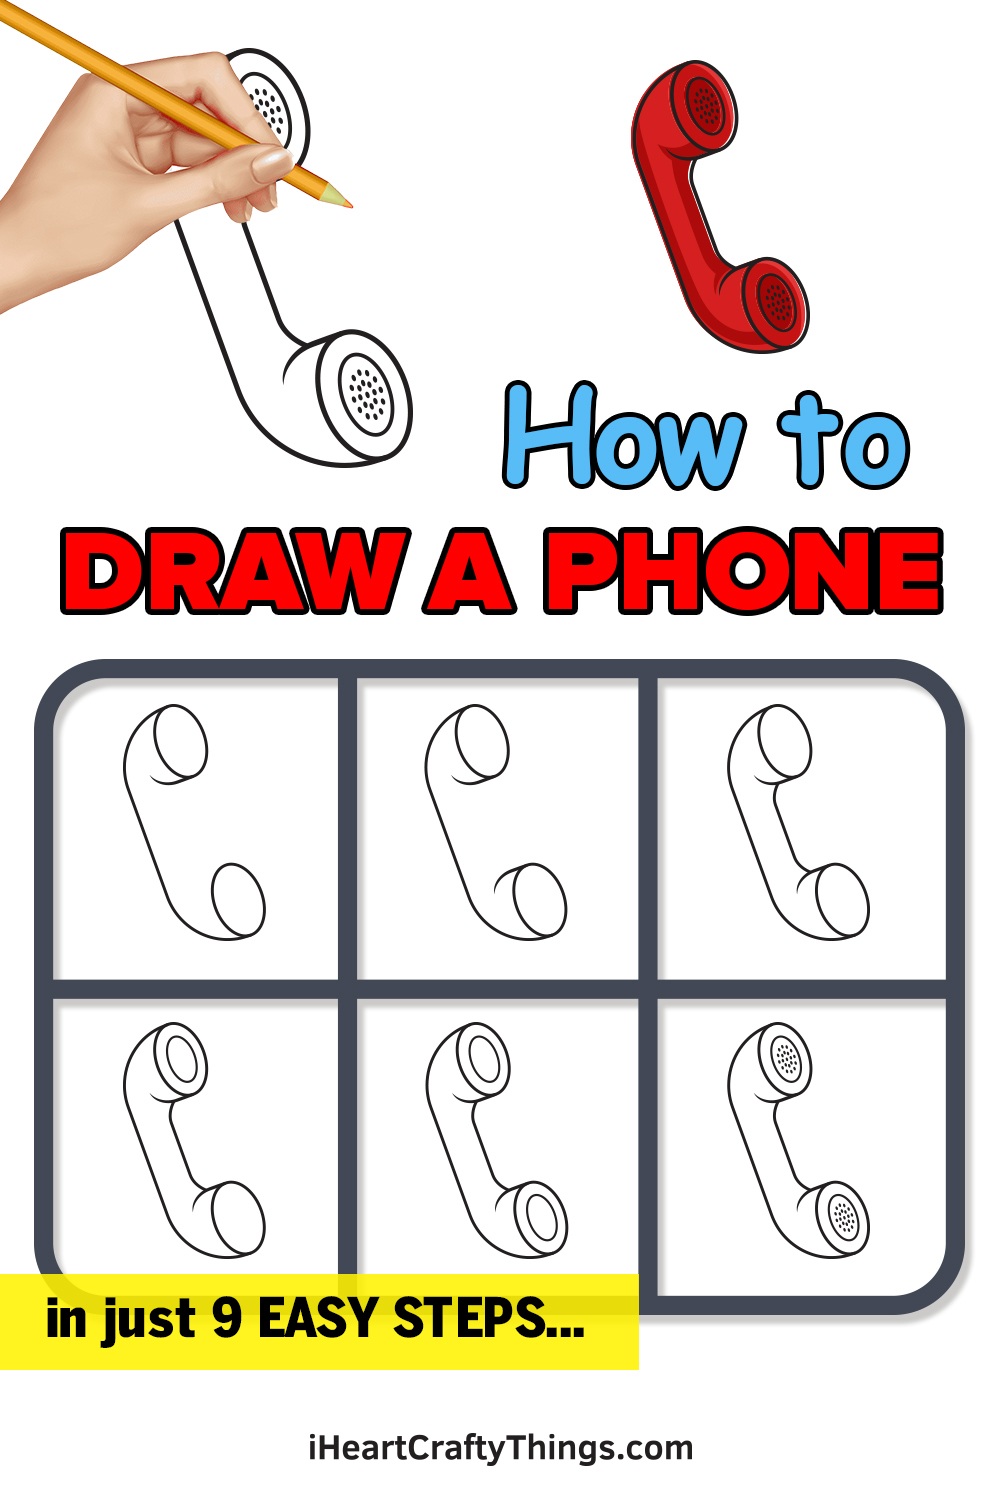 how to draw a phone in 9 easy steps